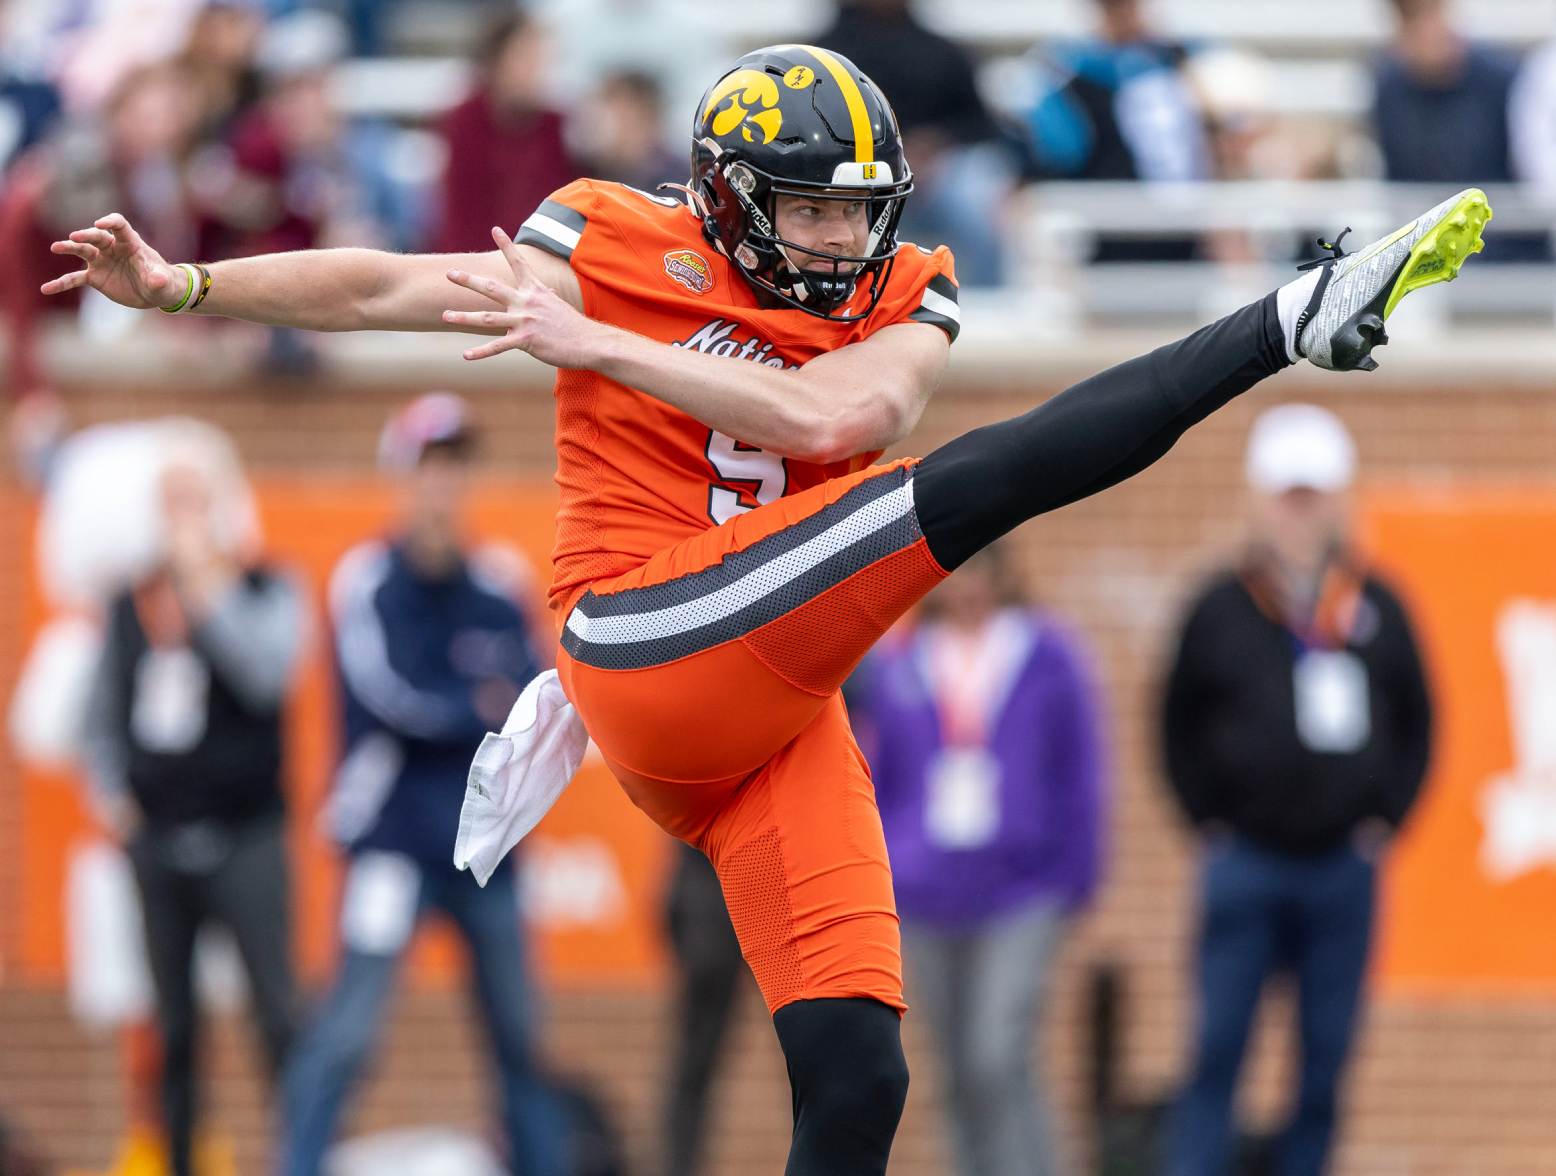 Feb 3, 2024; Mobile, AL, USA; National punter Tory Taylor of Iowa (9) punts during the first half of the 2024 Senior Bowl football game at Hancock Whitney Stadium. Credit: Vasha Hunt-USA TODAY Sports